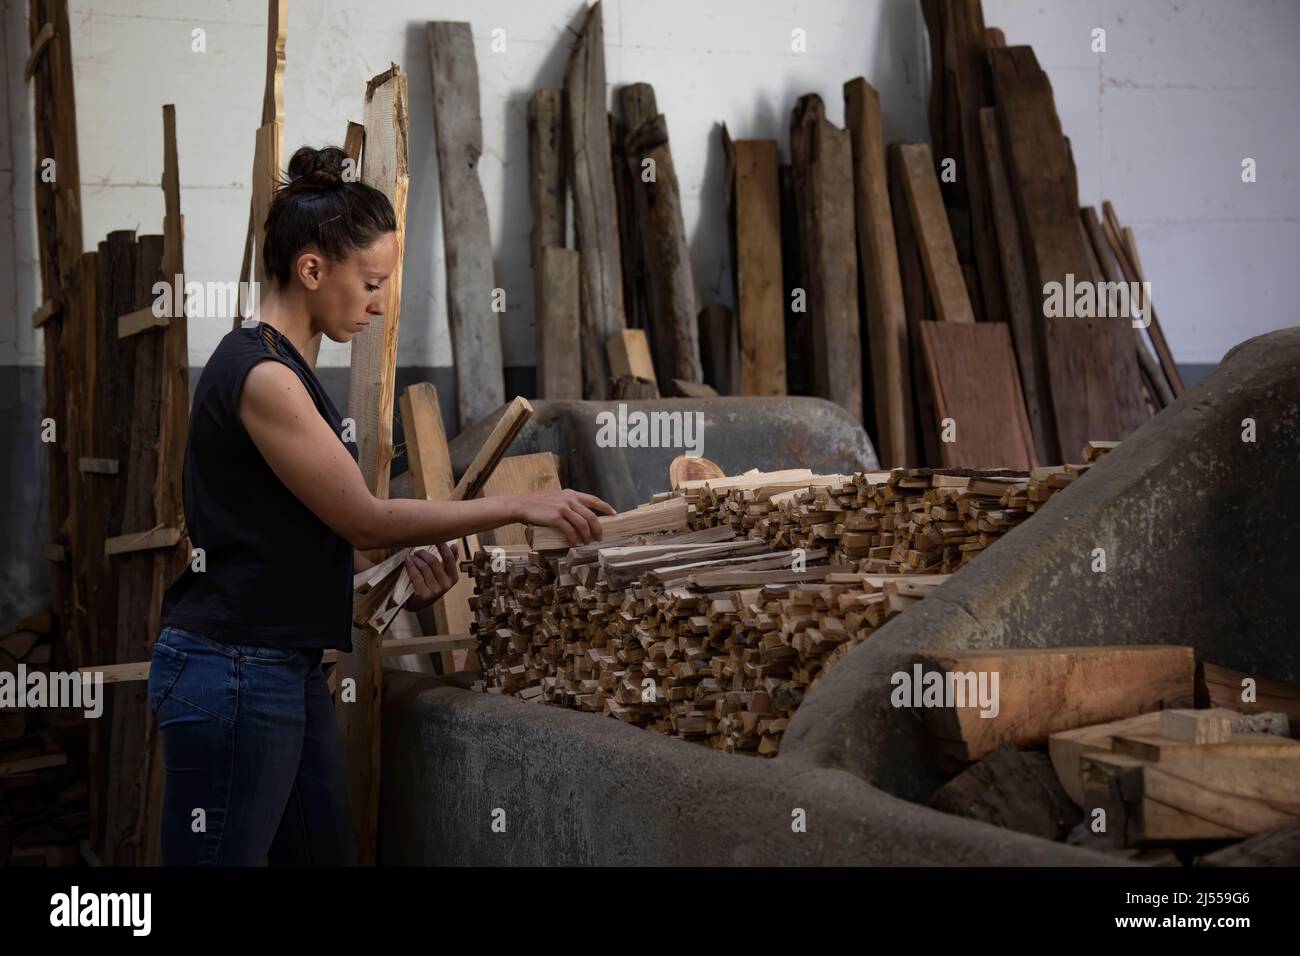 brunette woman with her hair in a bun working while repositioning freshly cut wood to light the fire in the storehouse. Copy space Stock Photo